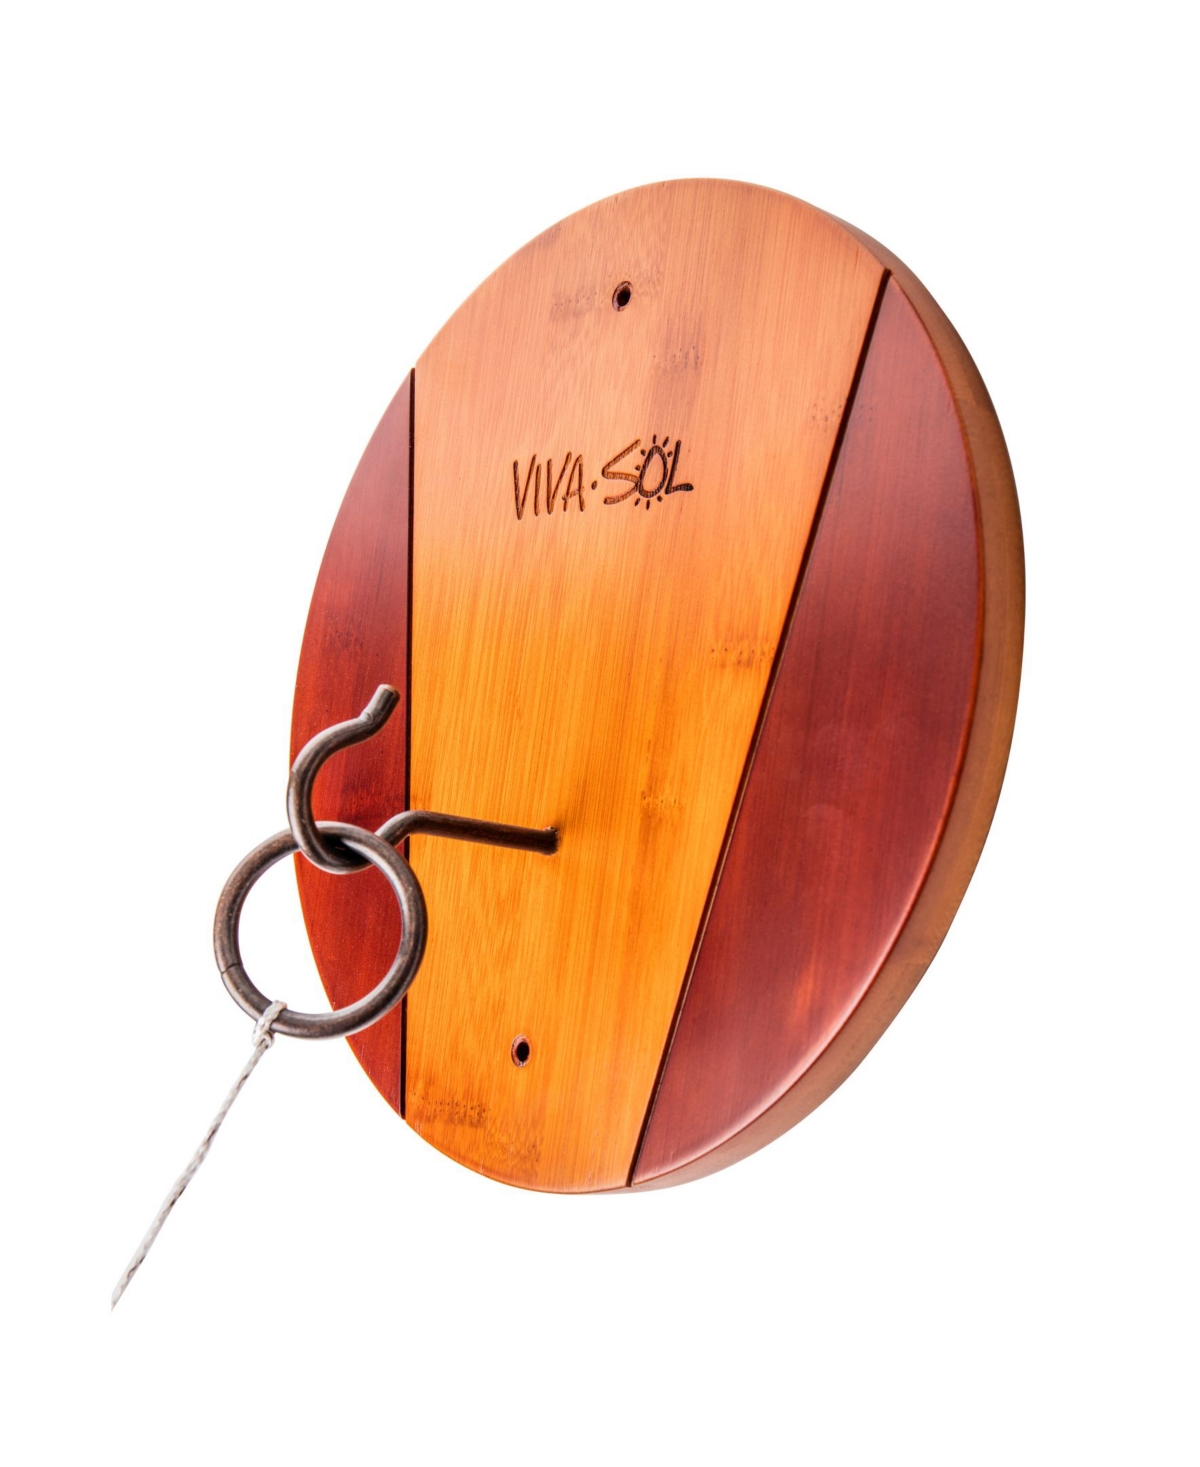 Viva Sol Premium All-wood Walnut Finish Hook And Ring Target Game For Use Indoors And Outdoors In Brown